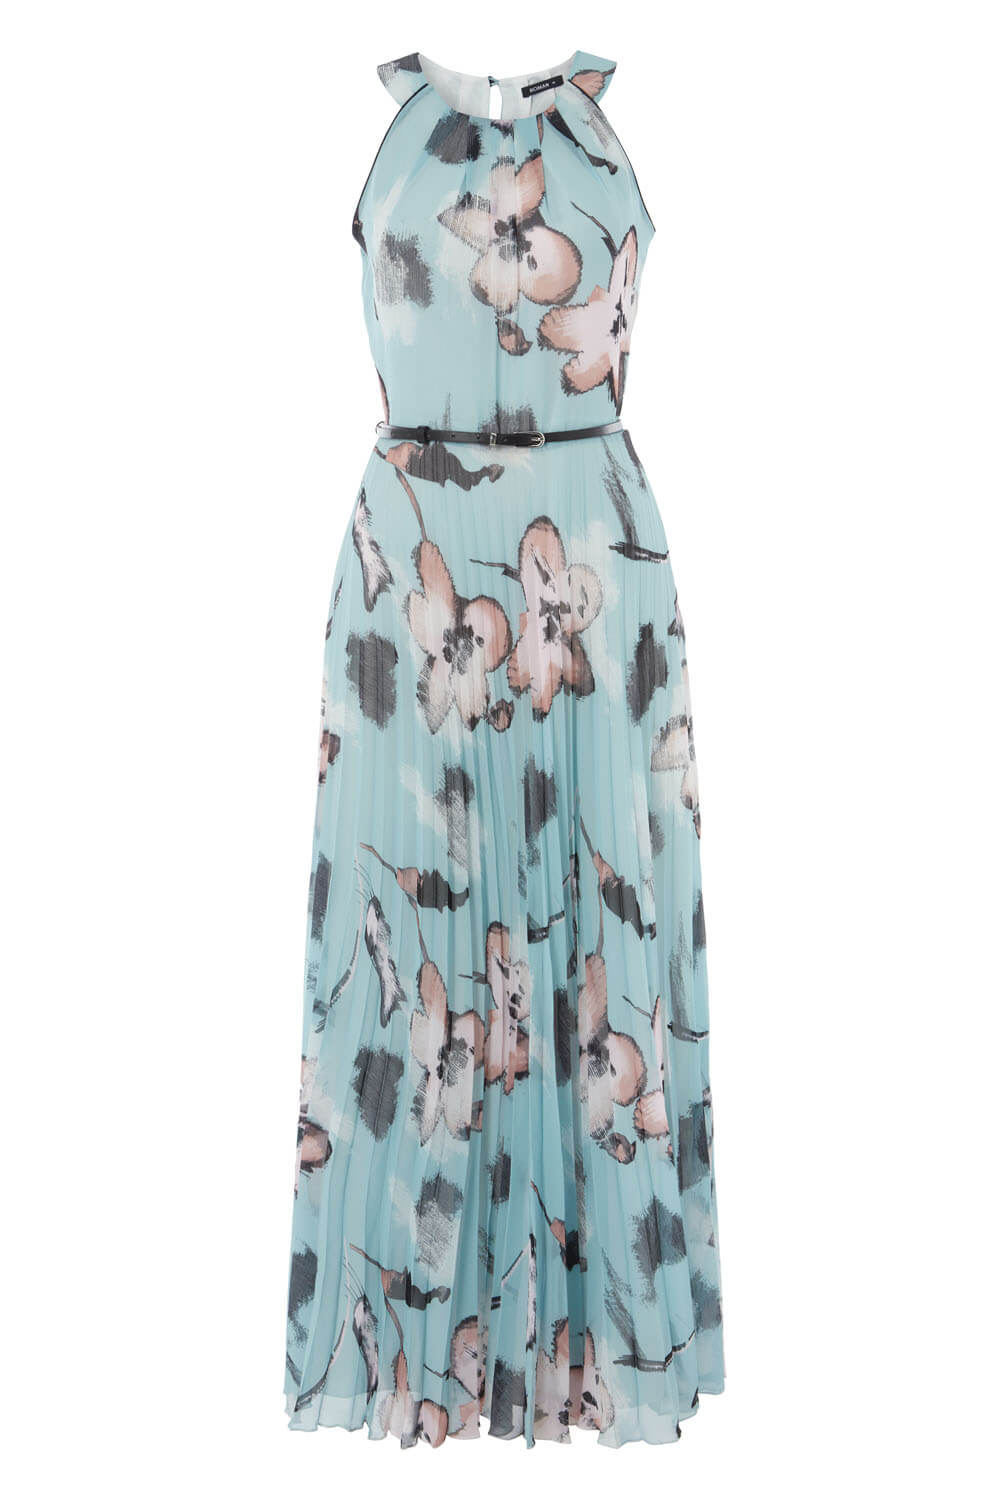 Mint Floral Halter Neck Pleated Maxi Dress, Image 5 of 5